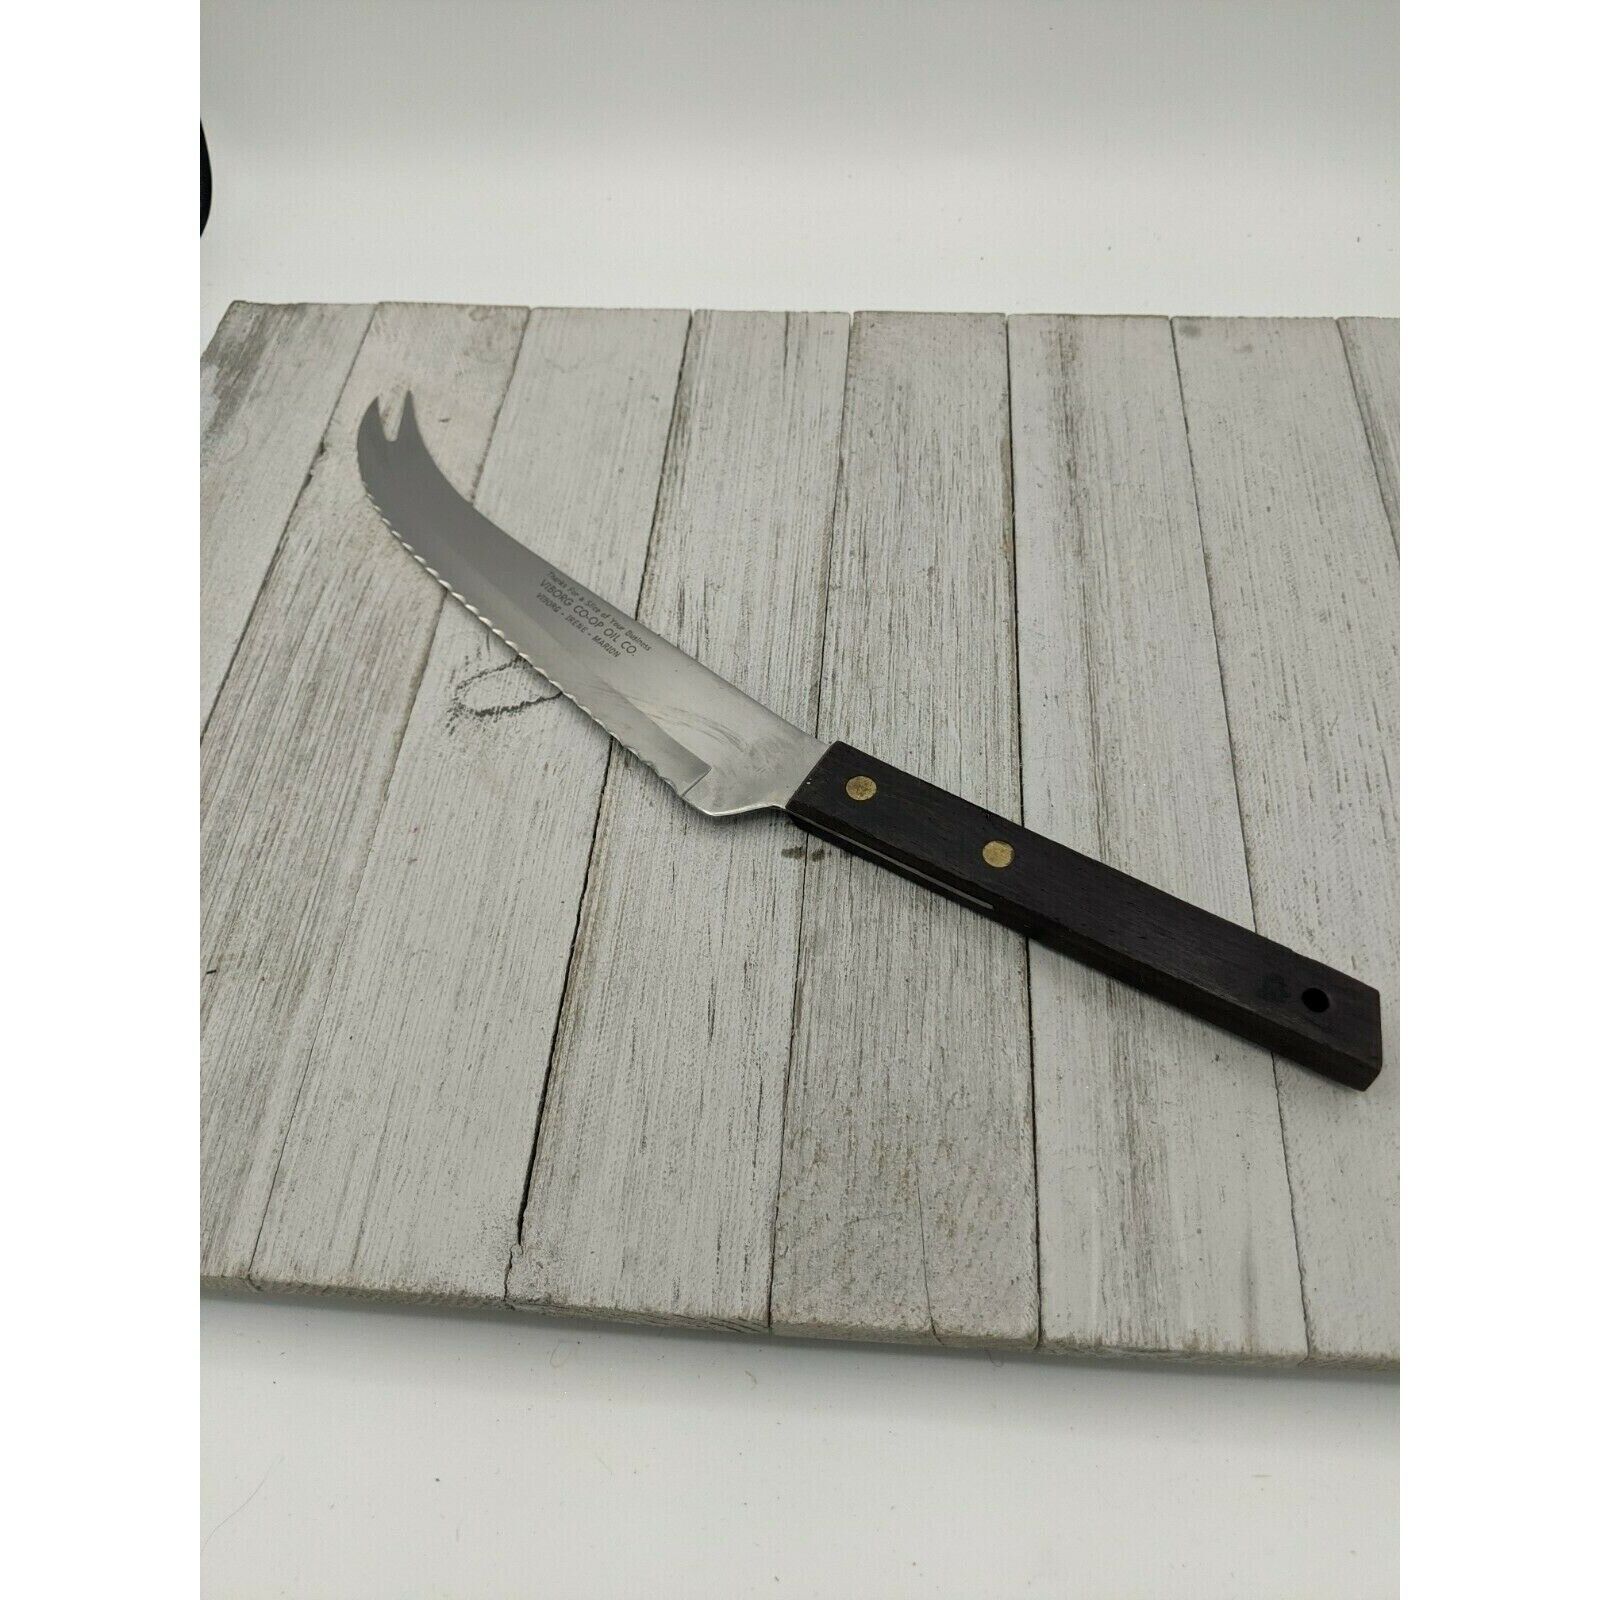 Vernco Utility All Purpose Carving Slicing Knife Serrated 2 Prongs 13" - $11.99